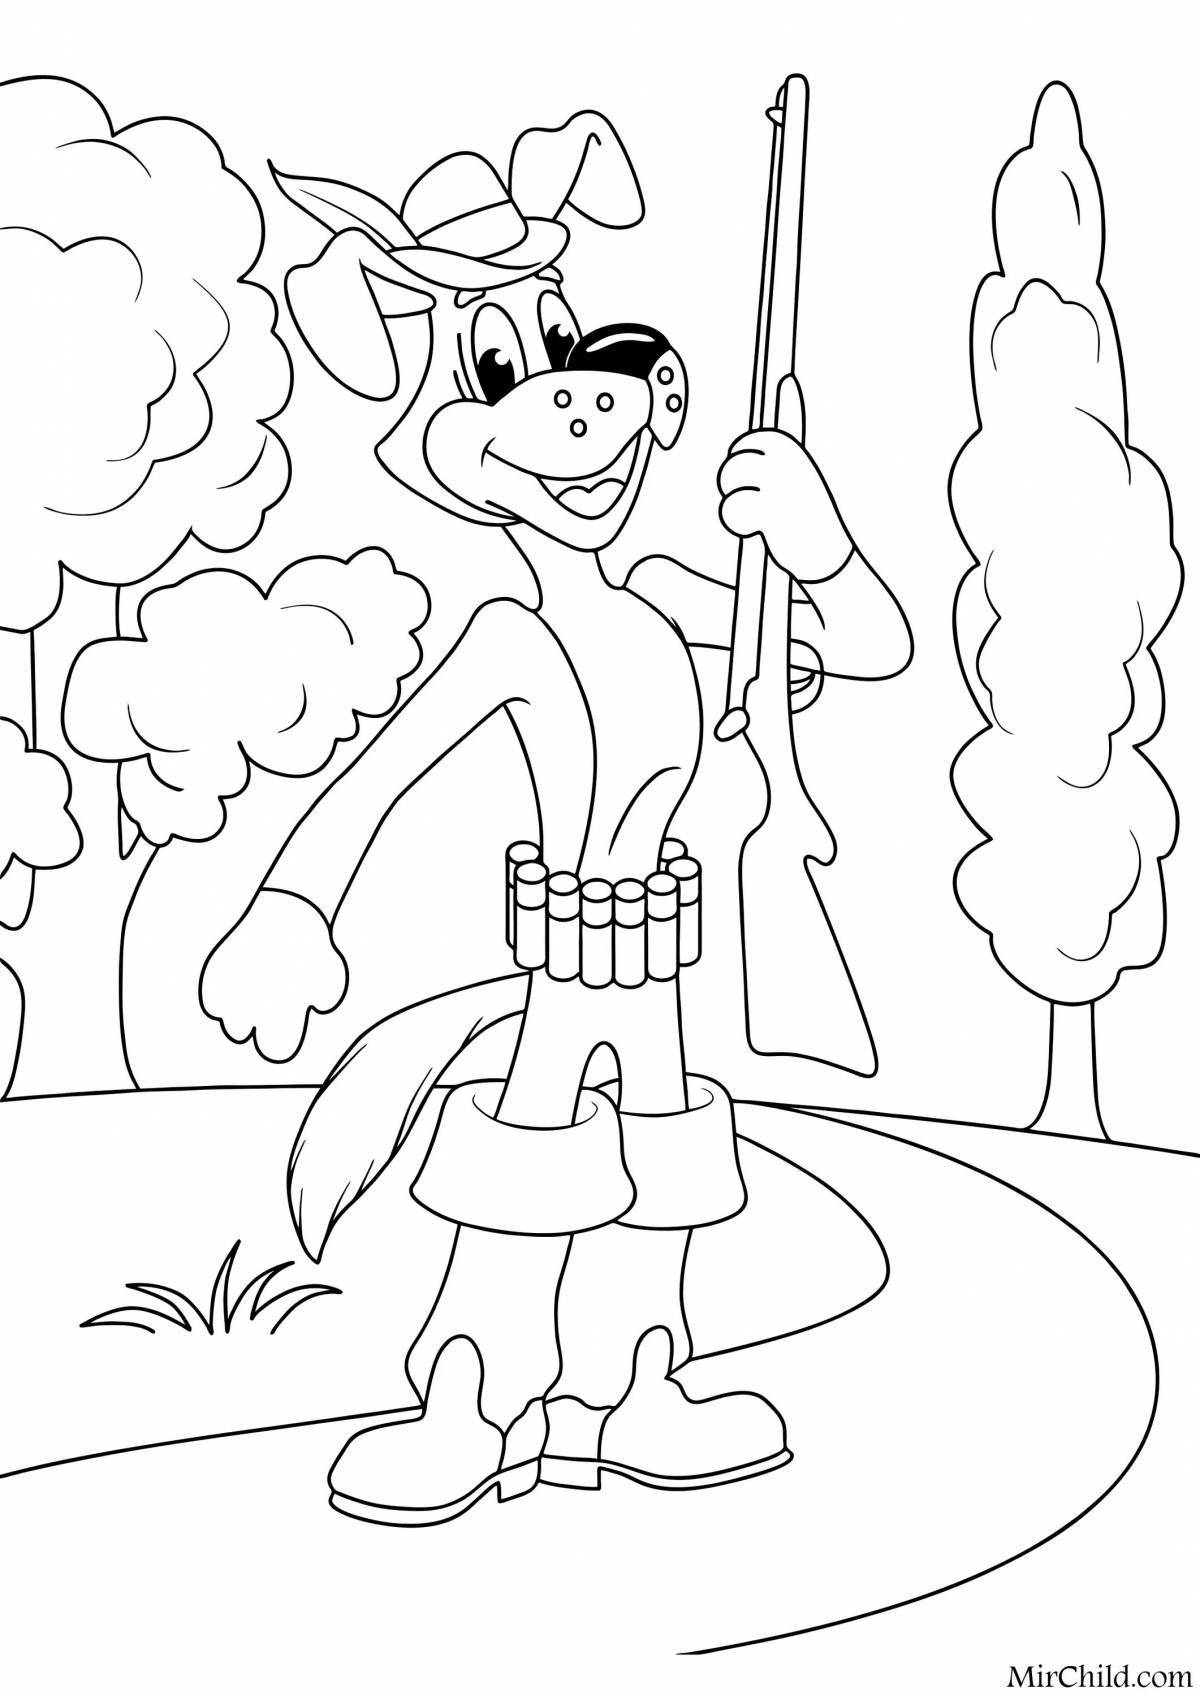 Exciting buttermilk coloring page